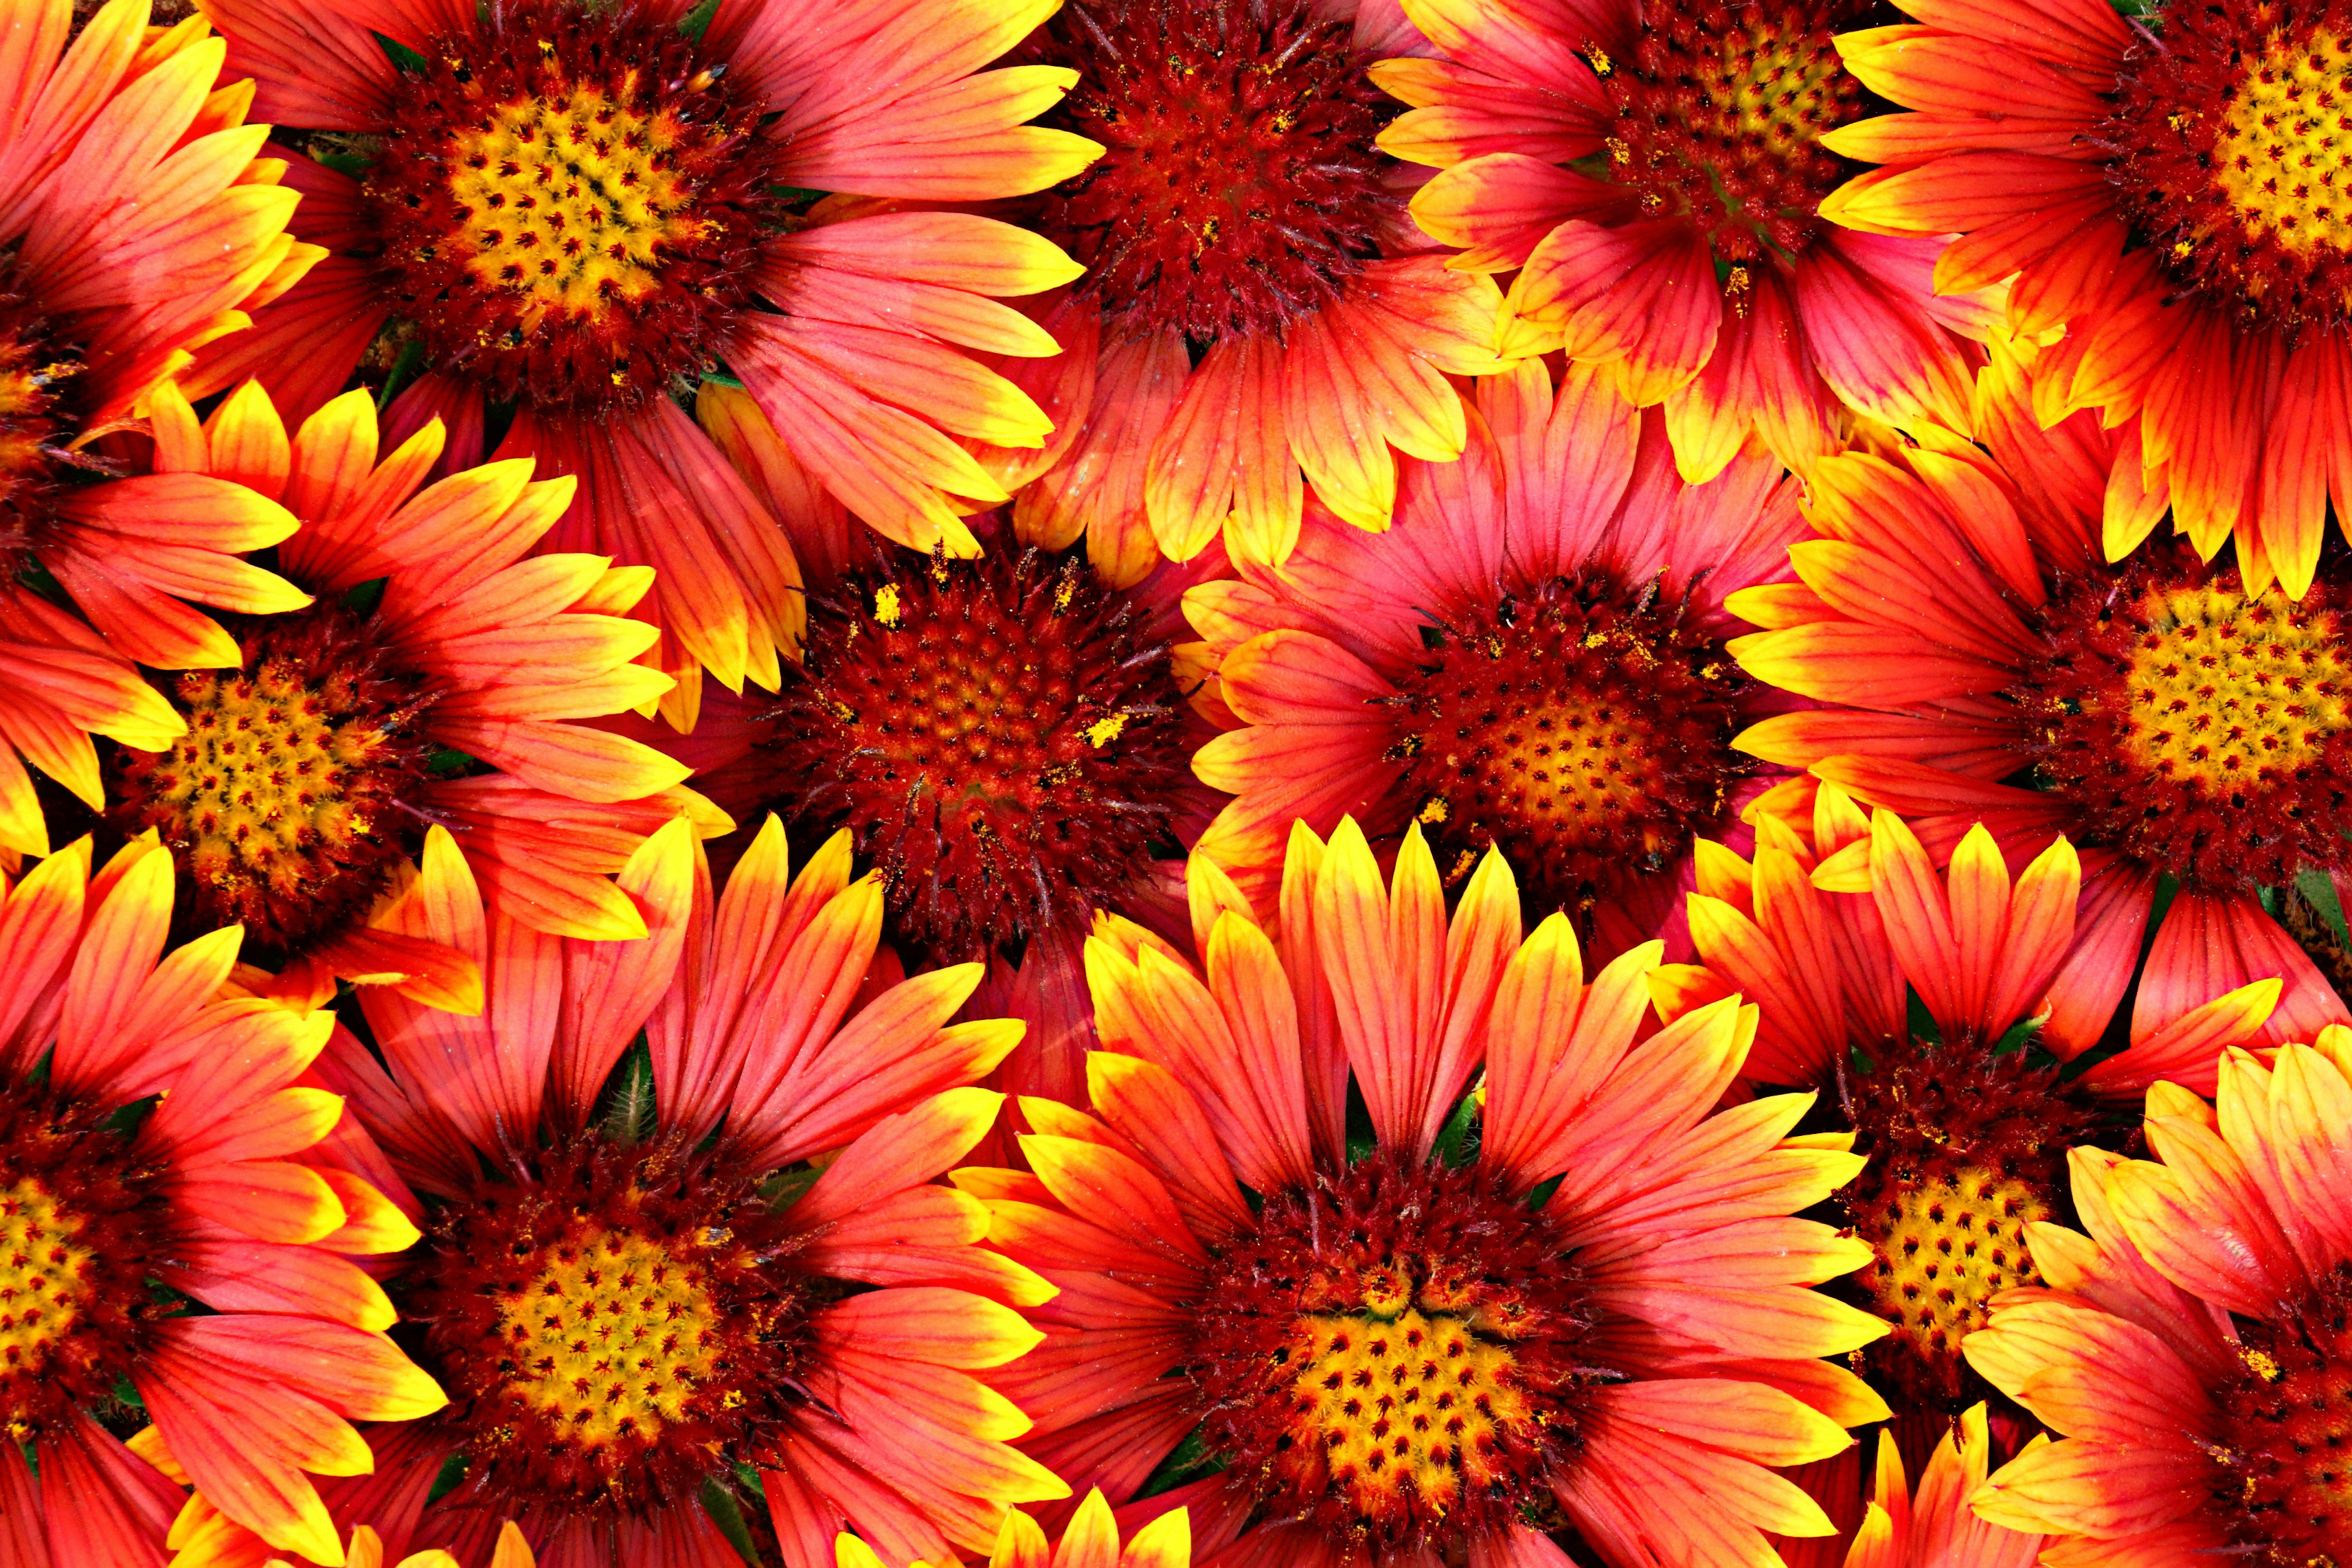 Free photo: Flowers background - Abstract, Sunshine ...